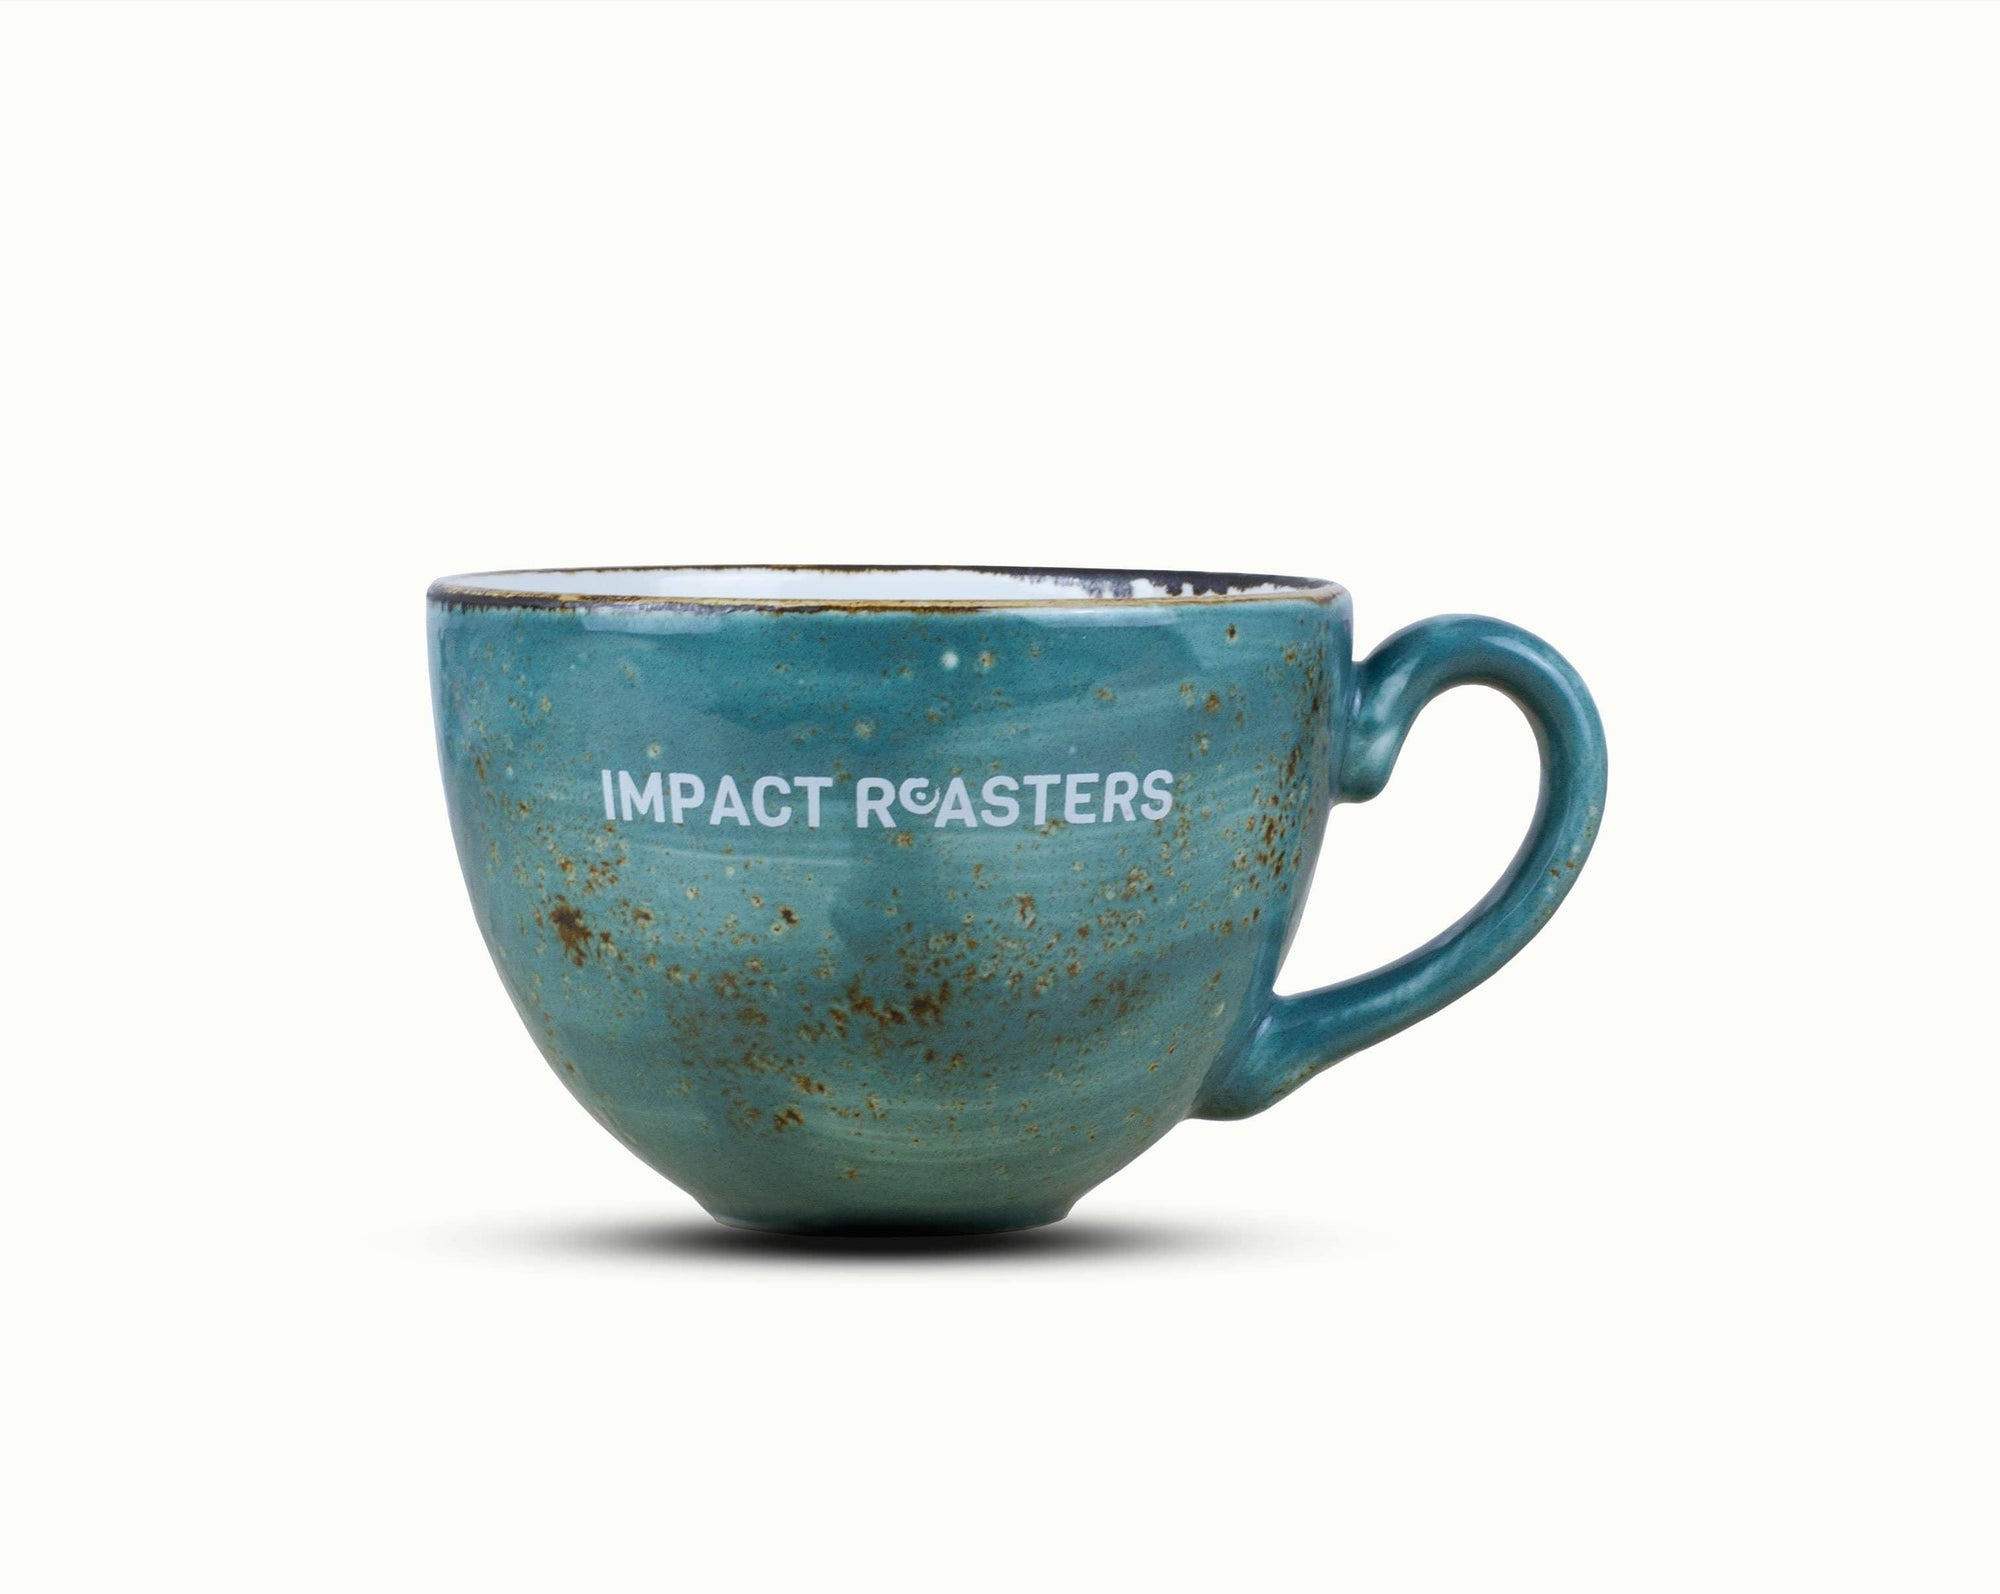 A ceramic cup with the Impact Roasters logo